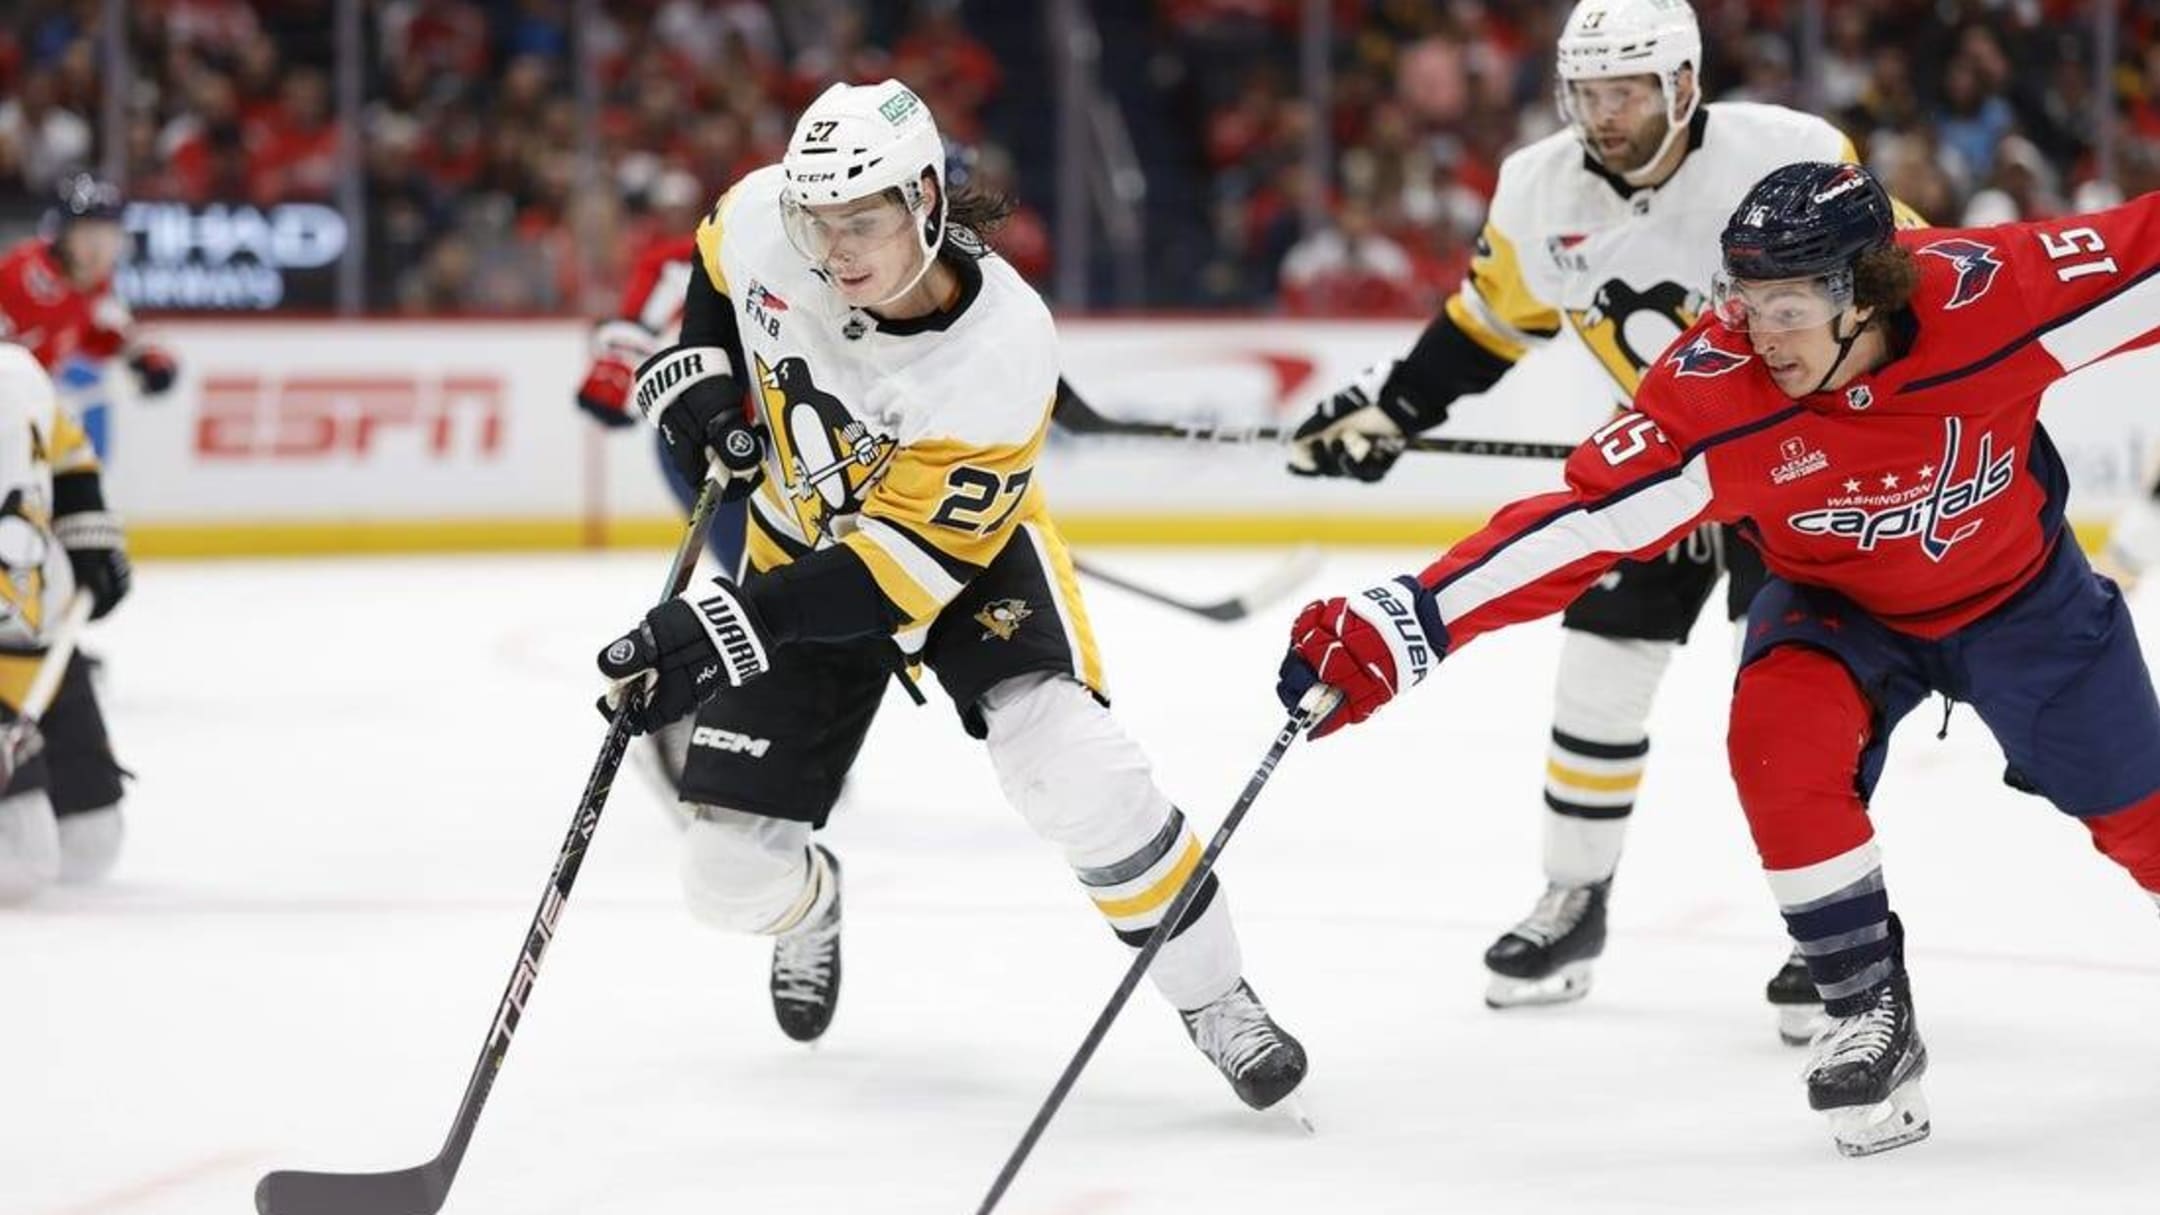 Sidney Crosby was asked about Tom Wilson's latest questionable hit